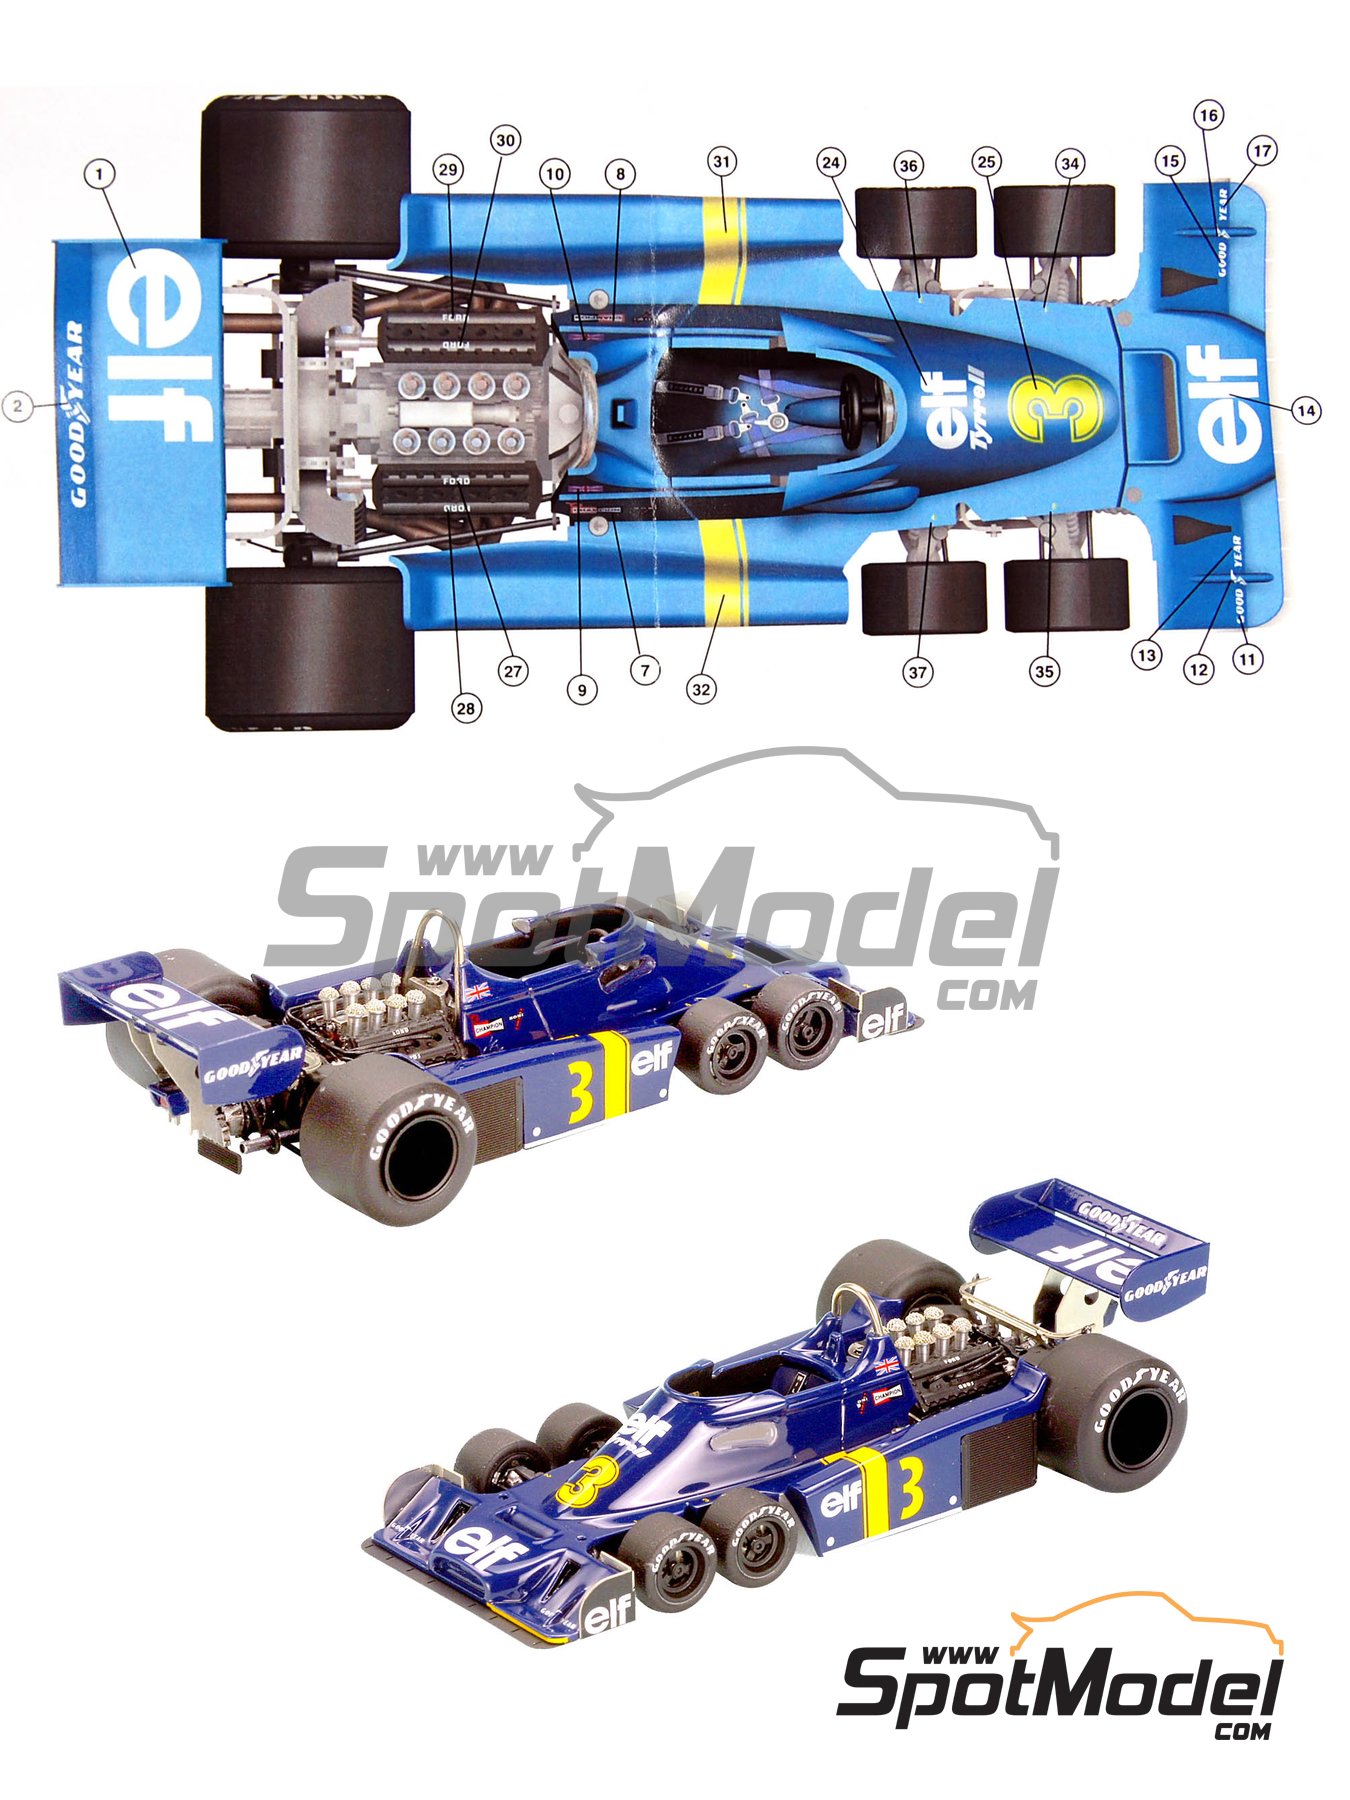 Tyrrell Ford P Six Wheels Tyrrell Racing Team sponsored by ELF   Dutch  Formula 1 Grand Prix . Car scale model kit in  scale manufactured by